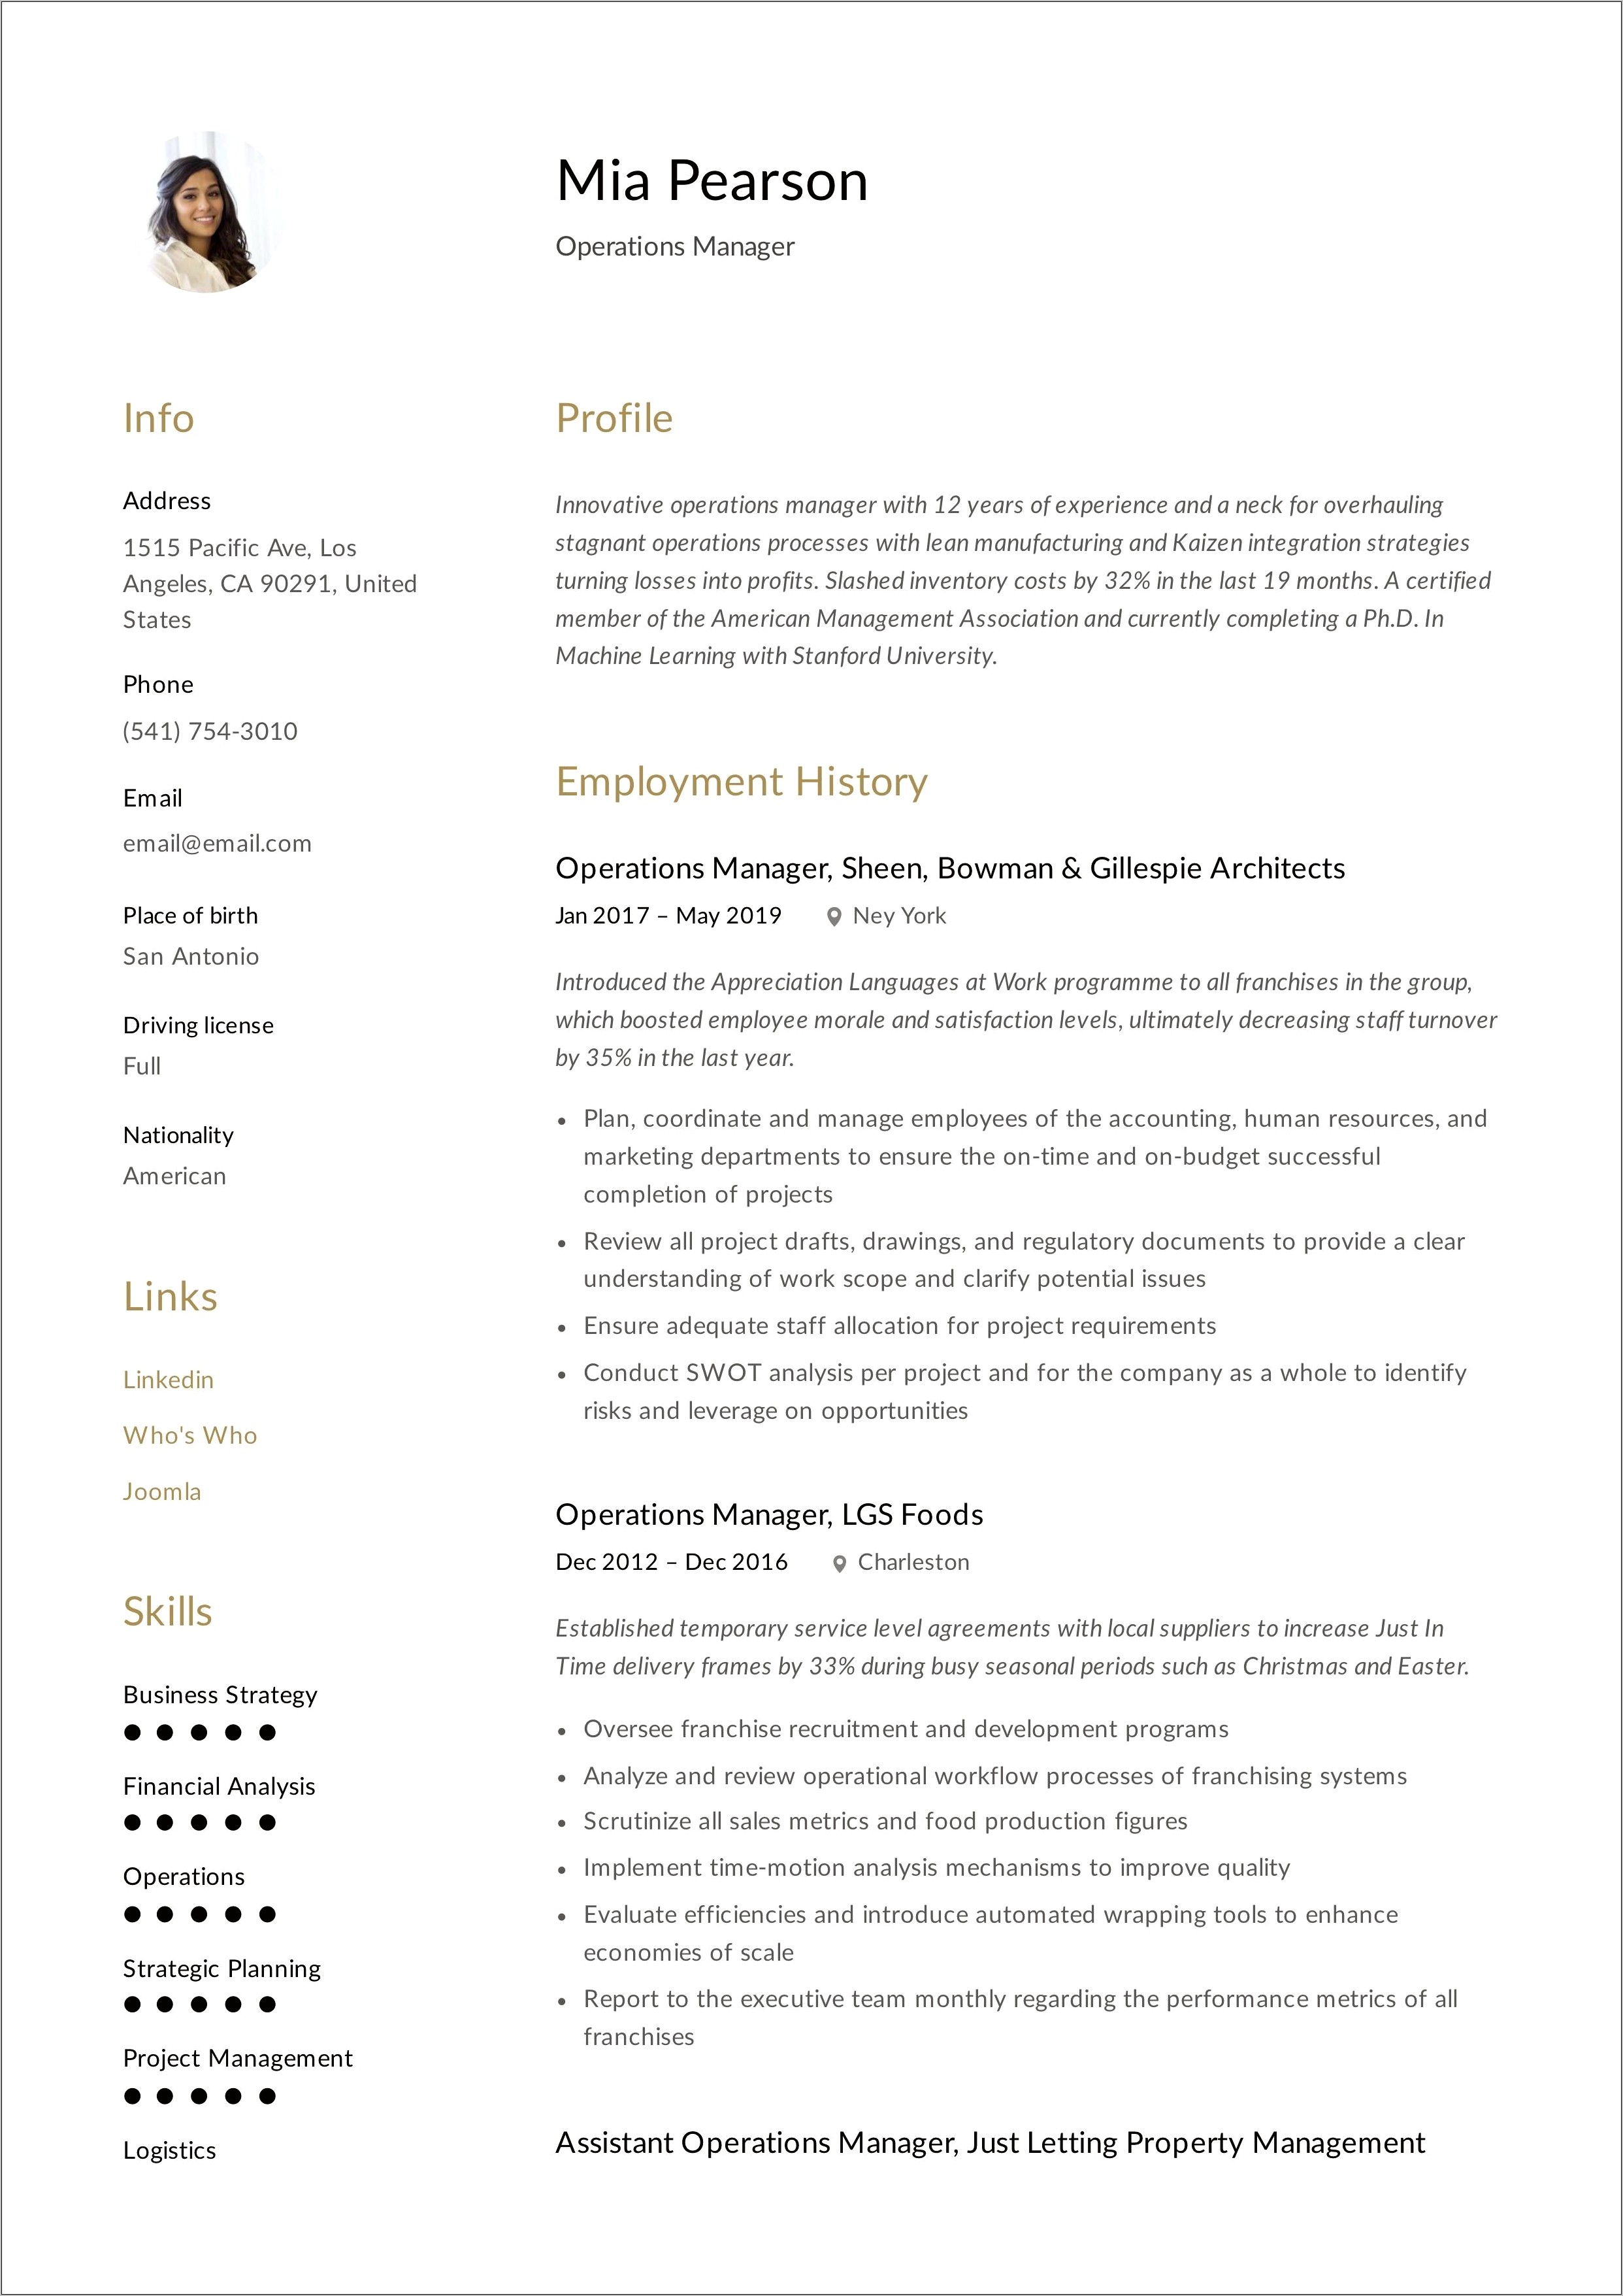 Sample Resume For Operations Manager In Banking